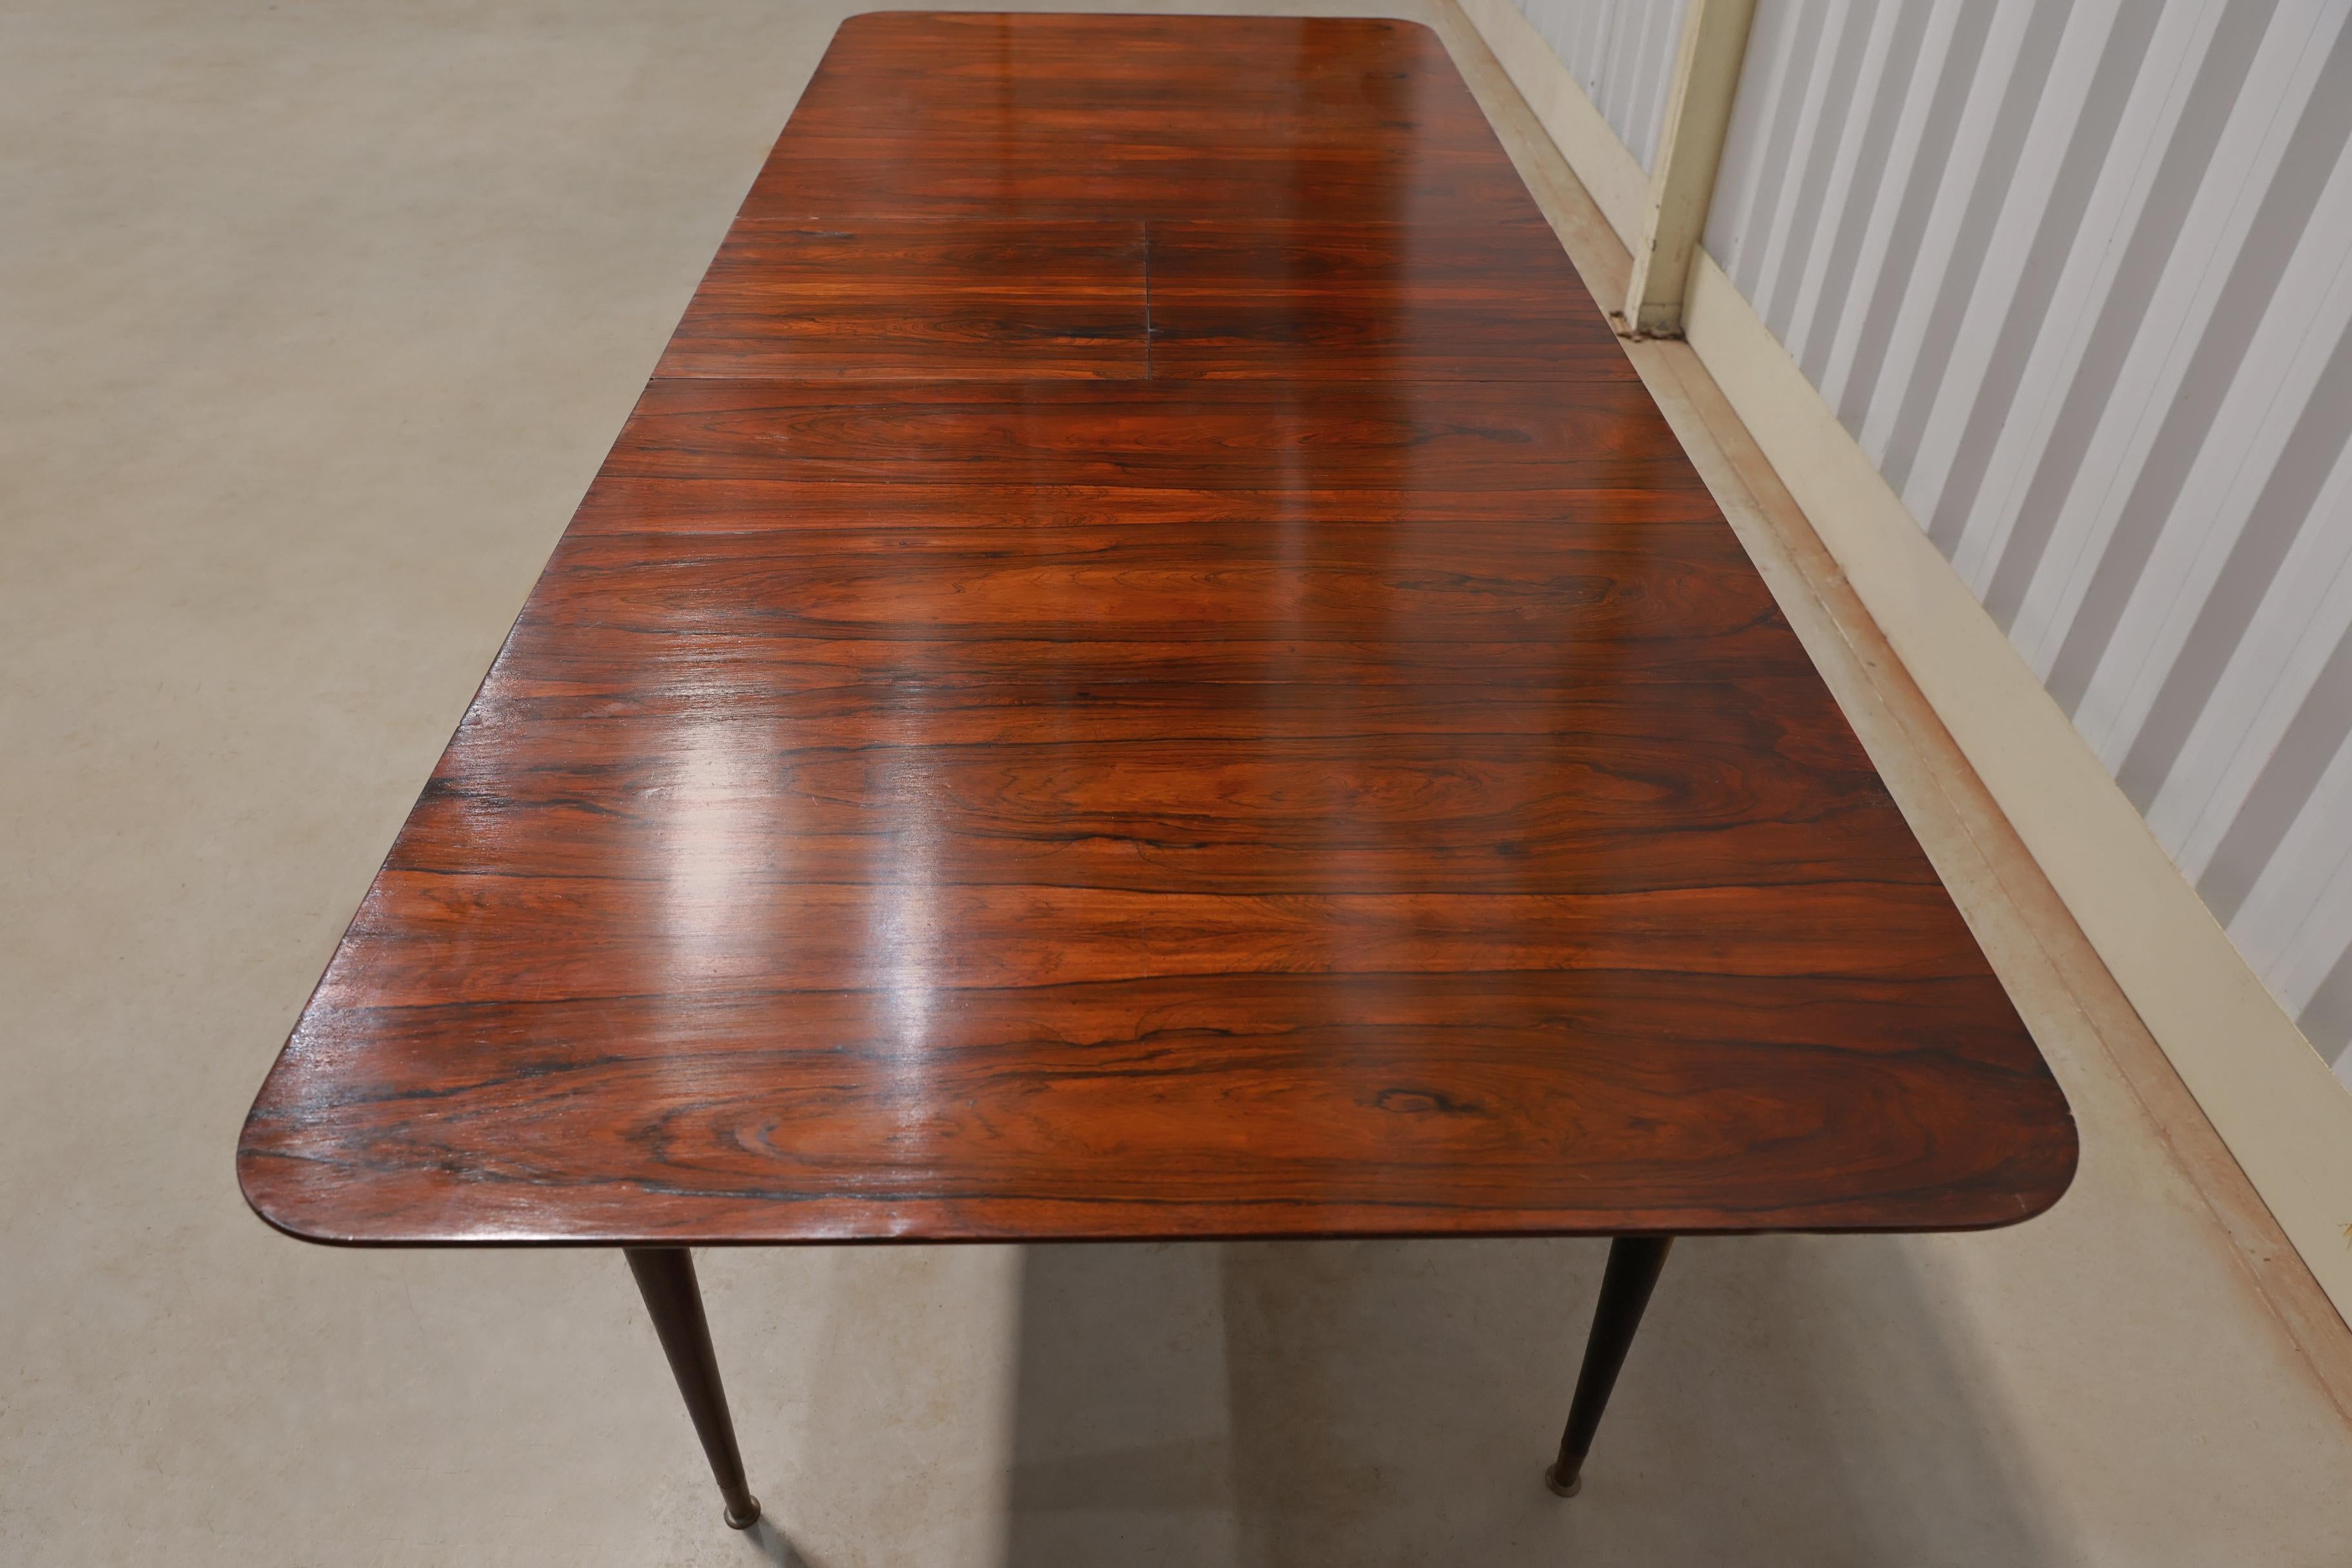 20th Century Mid-Century Modern Dining Table in Hardwood by Giuseppe Scapinelli, Brazil For Sale